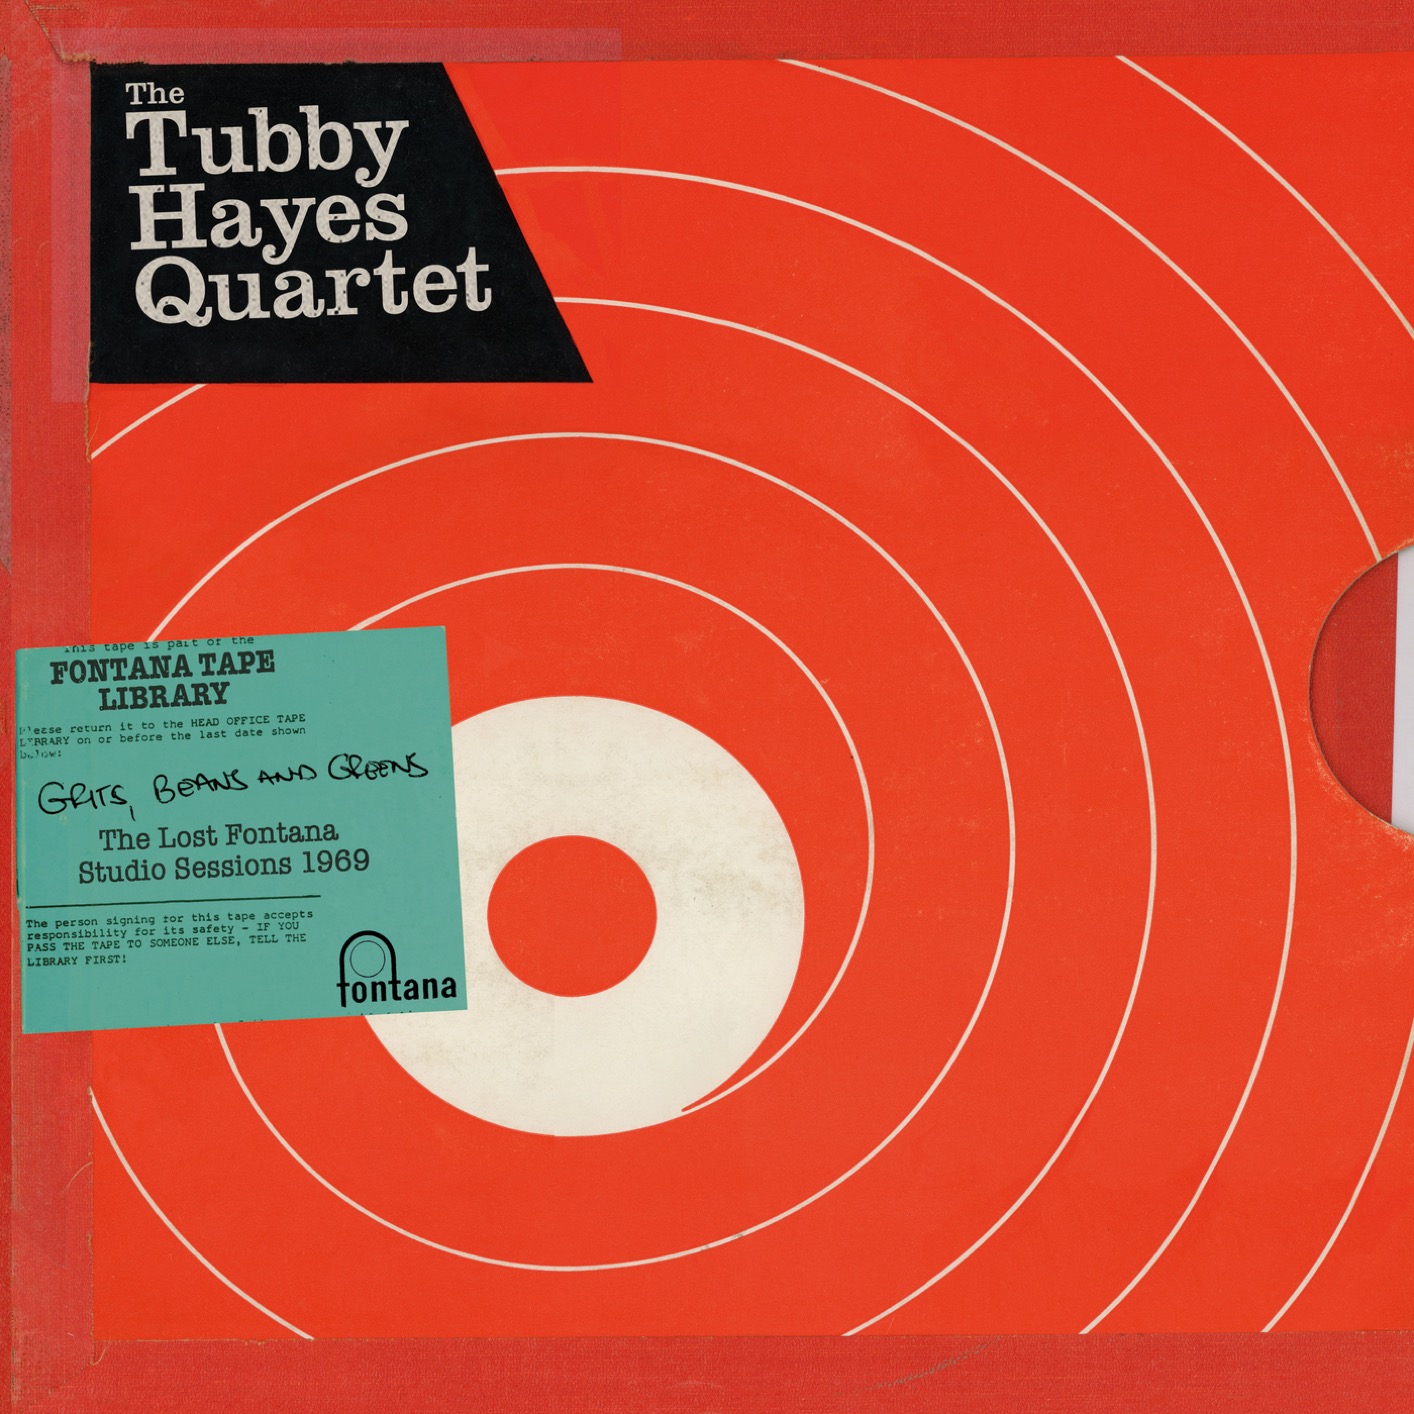 The Tubby Hayes Quartet - Grits, Beans And Greens: The Lost Fontana Studio Sessions 1969 (2019) [FLAC 24bit/88,2kHz]